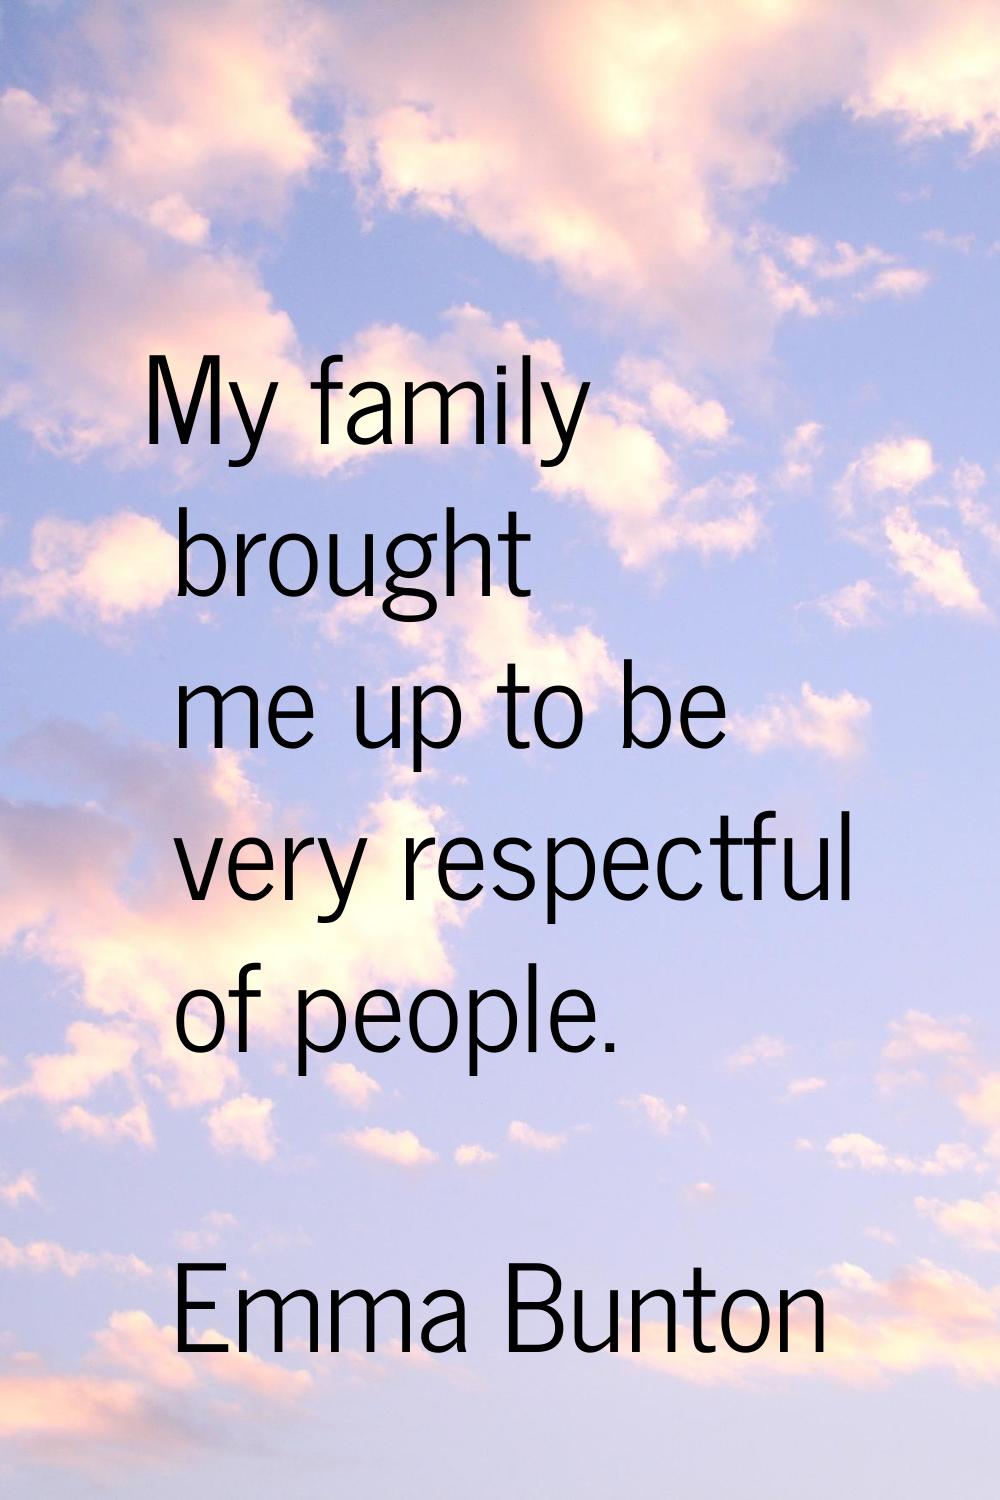 My family brought me up to be very respectful of people.